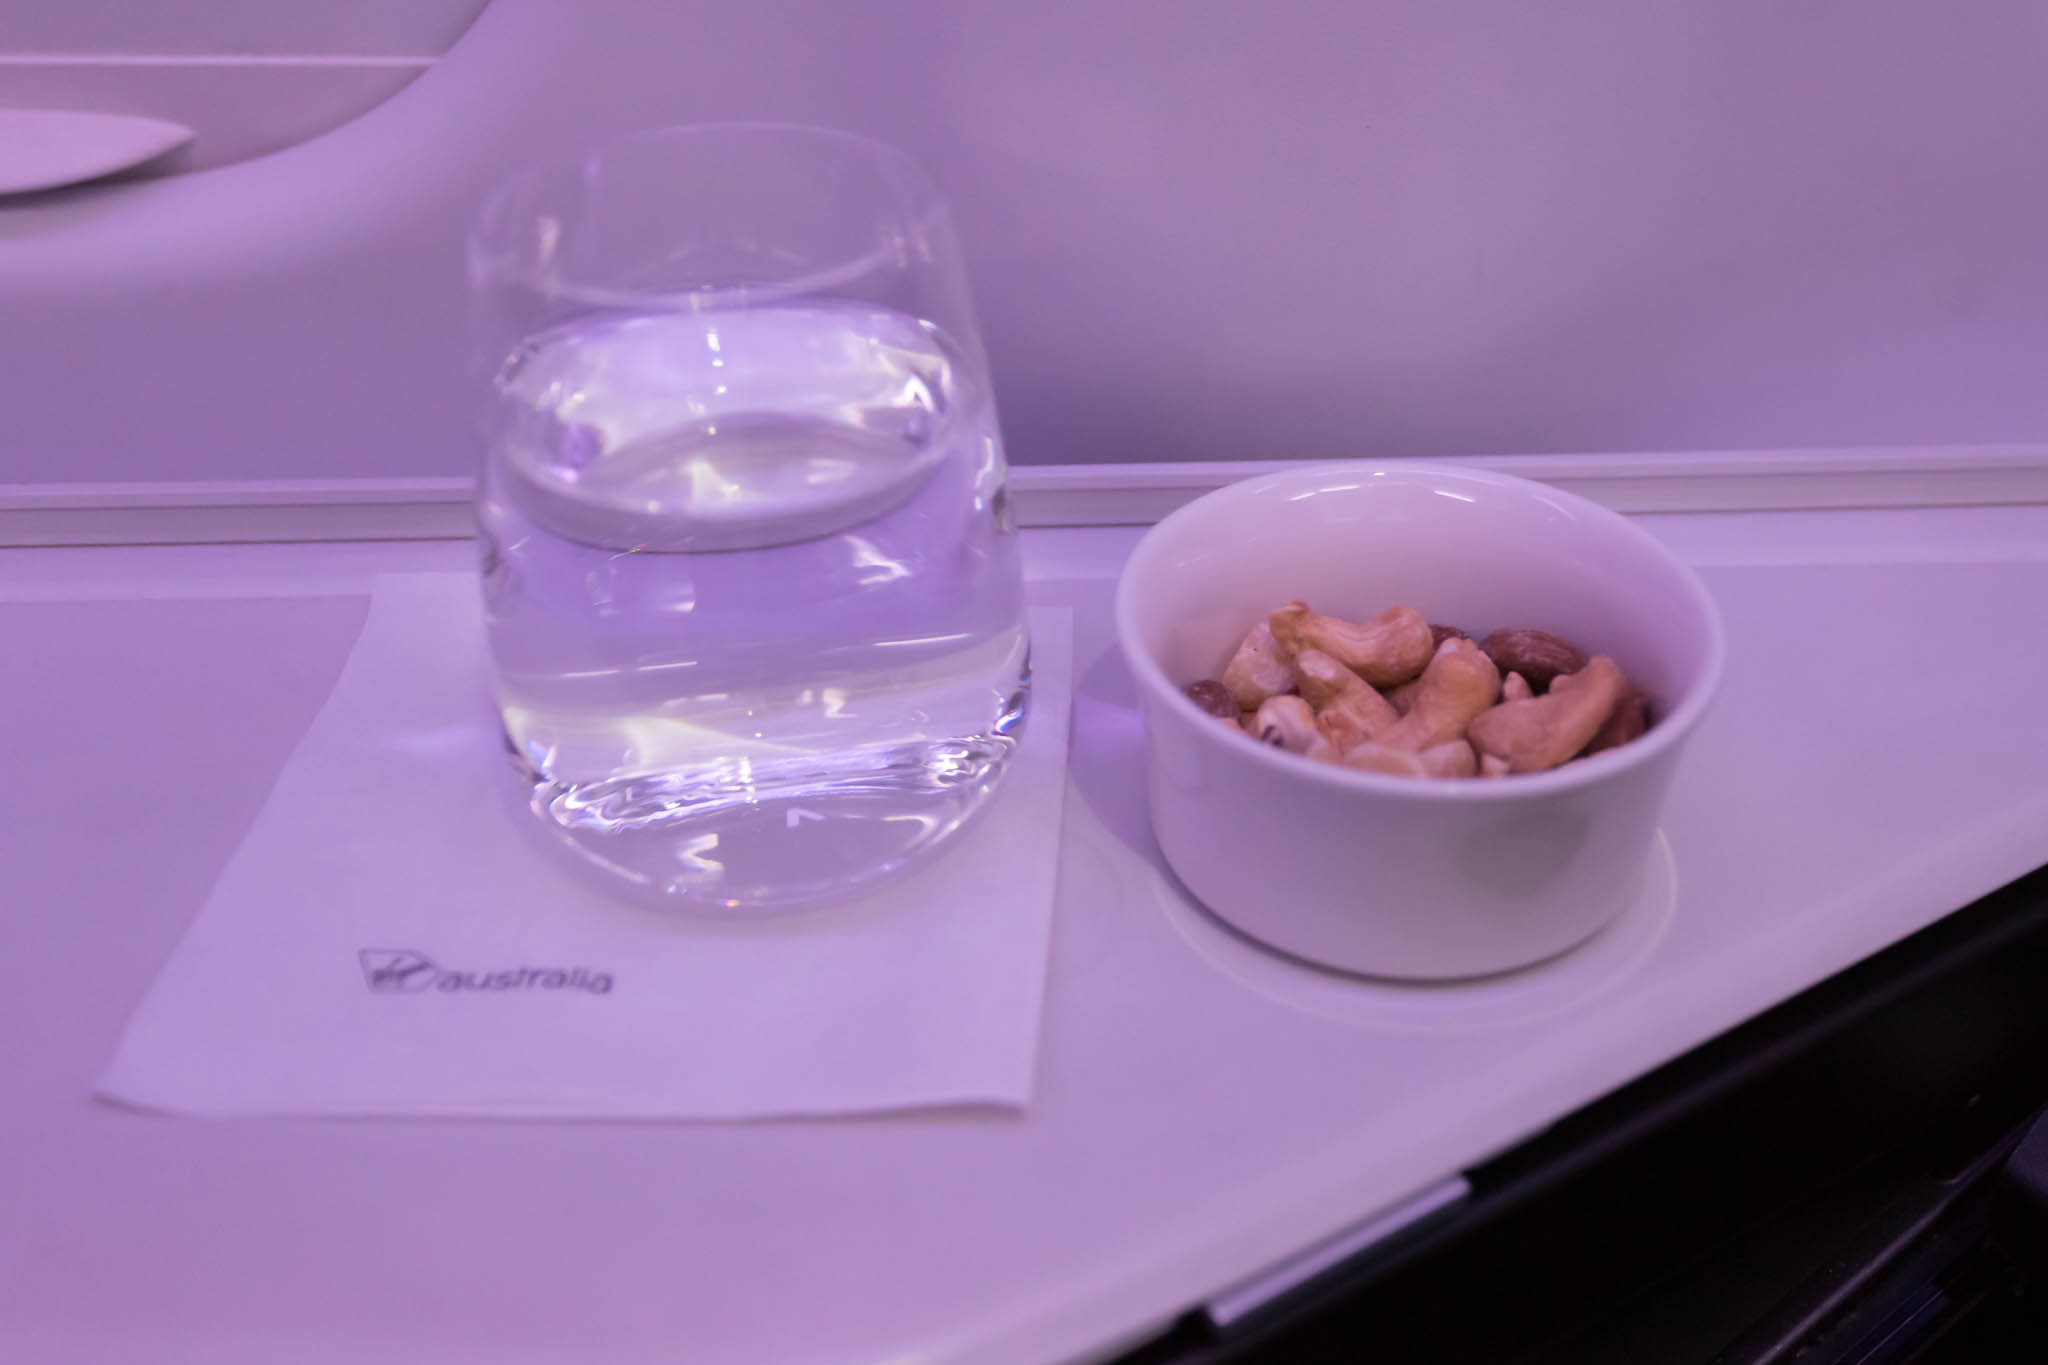 a bowl of nuts and a glass of water on a tray